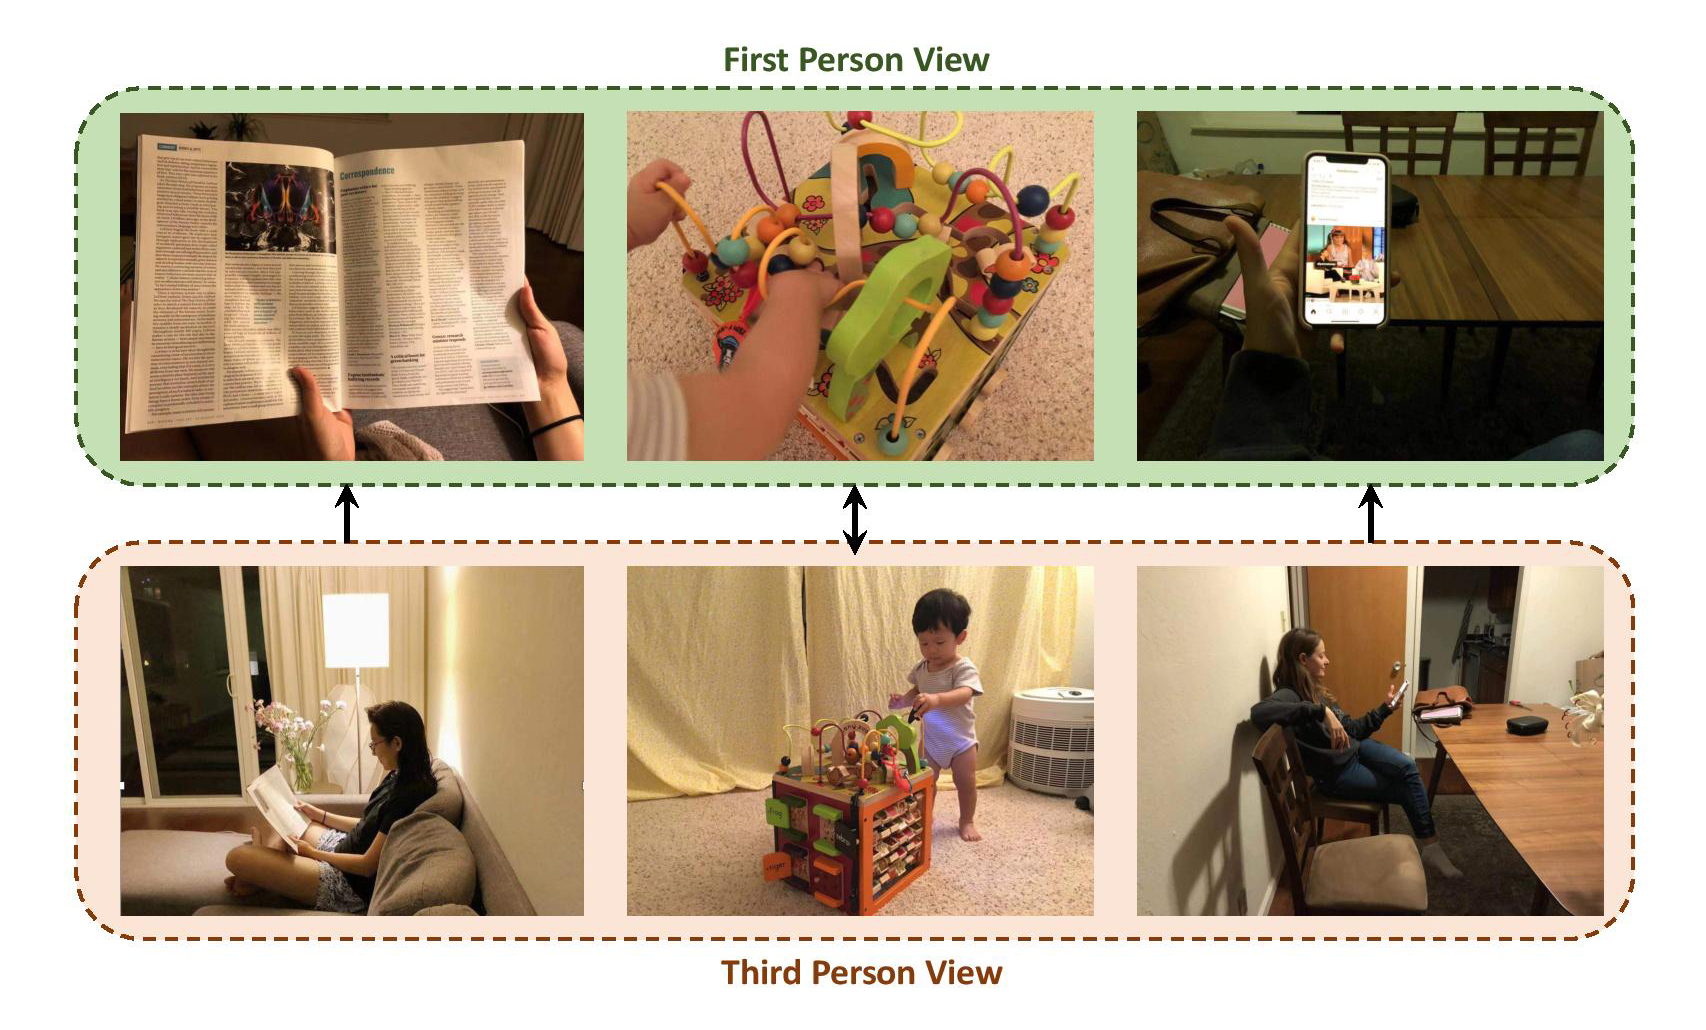 Three images showing a first-person view of a newspaper, baby toy, and phone, followed by three images showing a third-person view of a person sitting on a couch, a toddler playing with a toy, and a person looking at a phone.